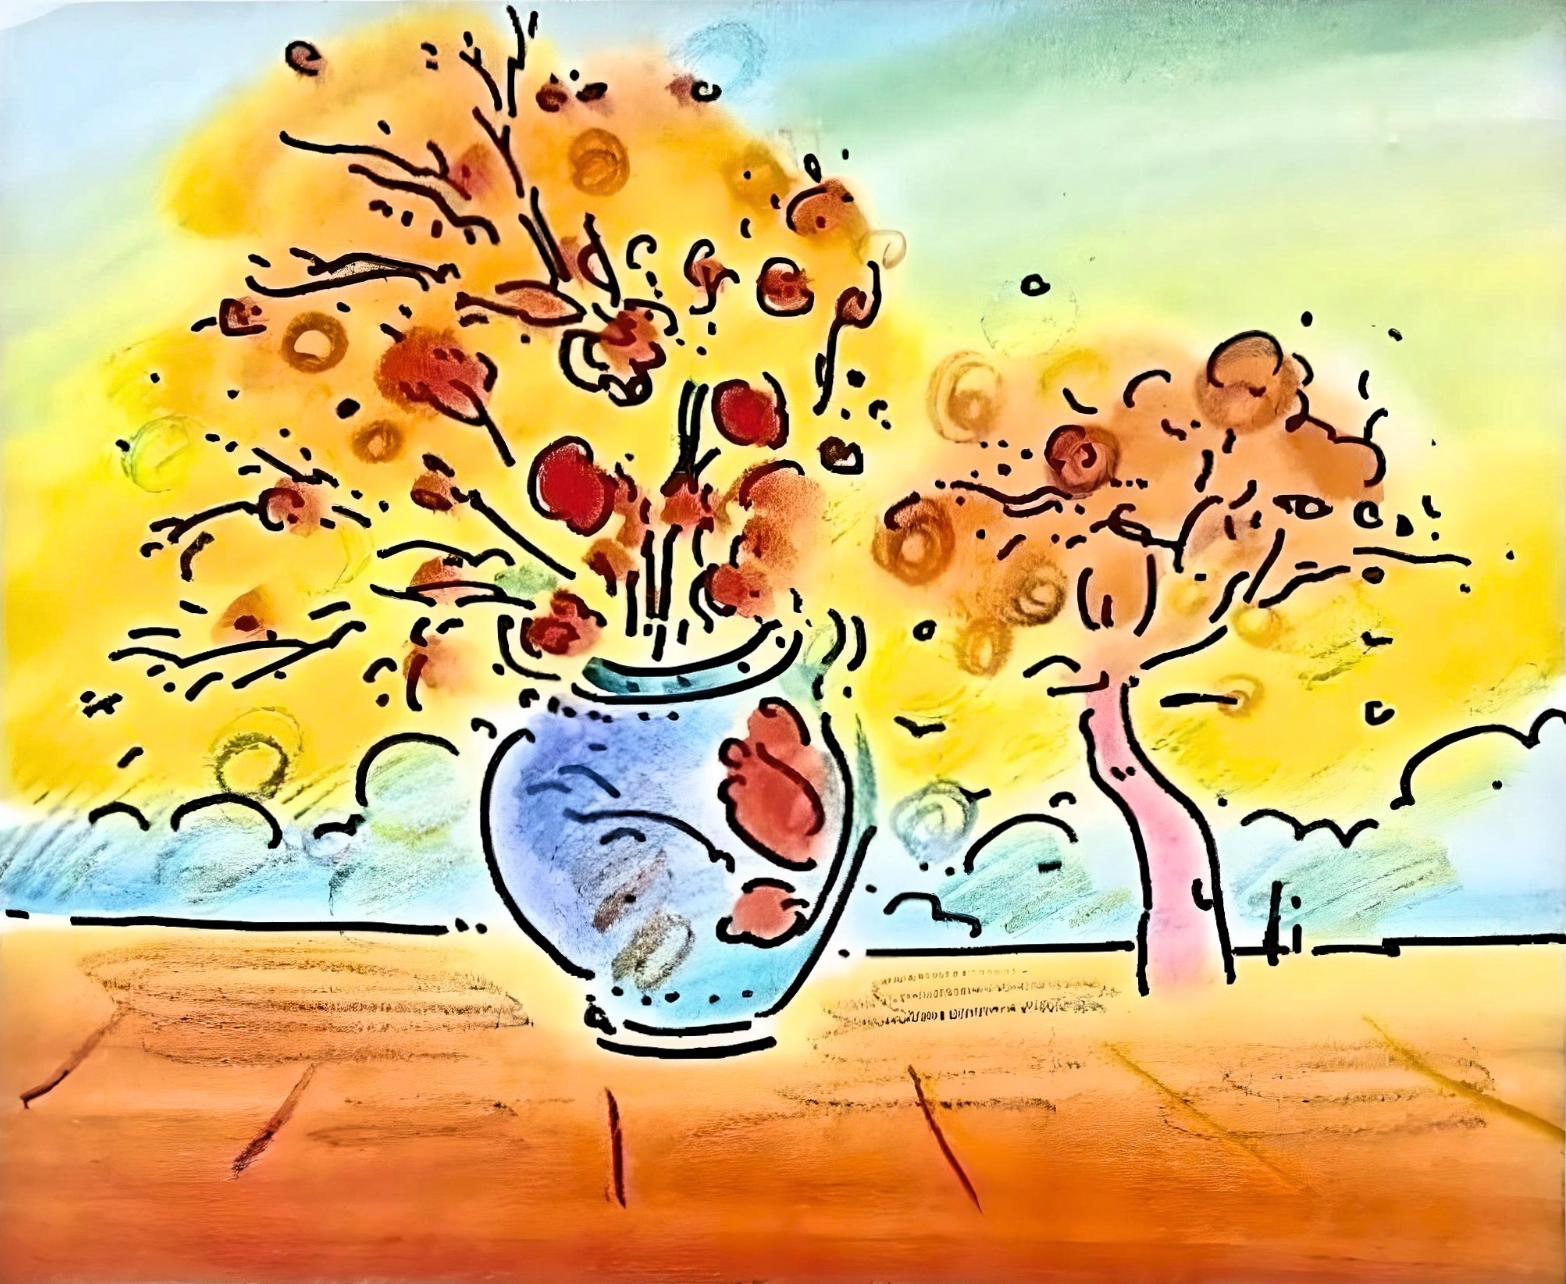 Artist: Peter Max (1937)
Title: Vase with Tree II
Year: 2000
Edition: 466/500, plus proofs
Medium: Lithograph on Lustro Saxony paper
Size: 7.5 x 8.25 inches
Condition: Excellent
Inscription: Signed and numbered by the artist.
Notes: Published by Via